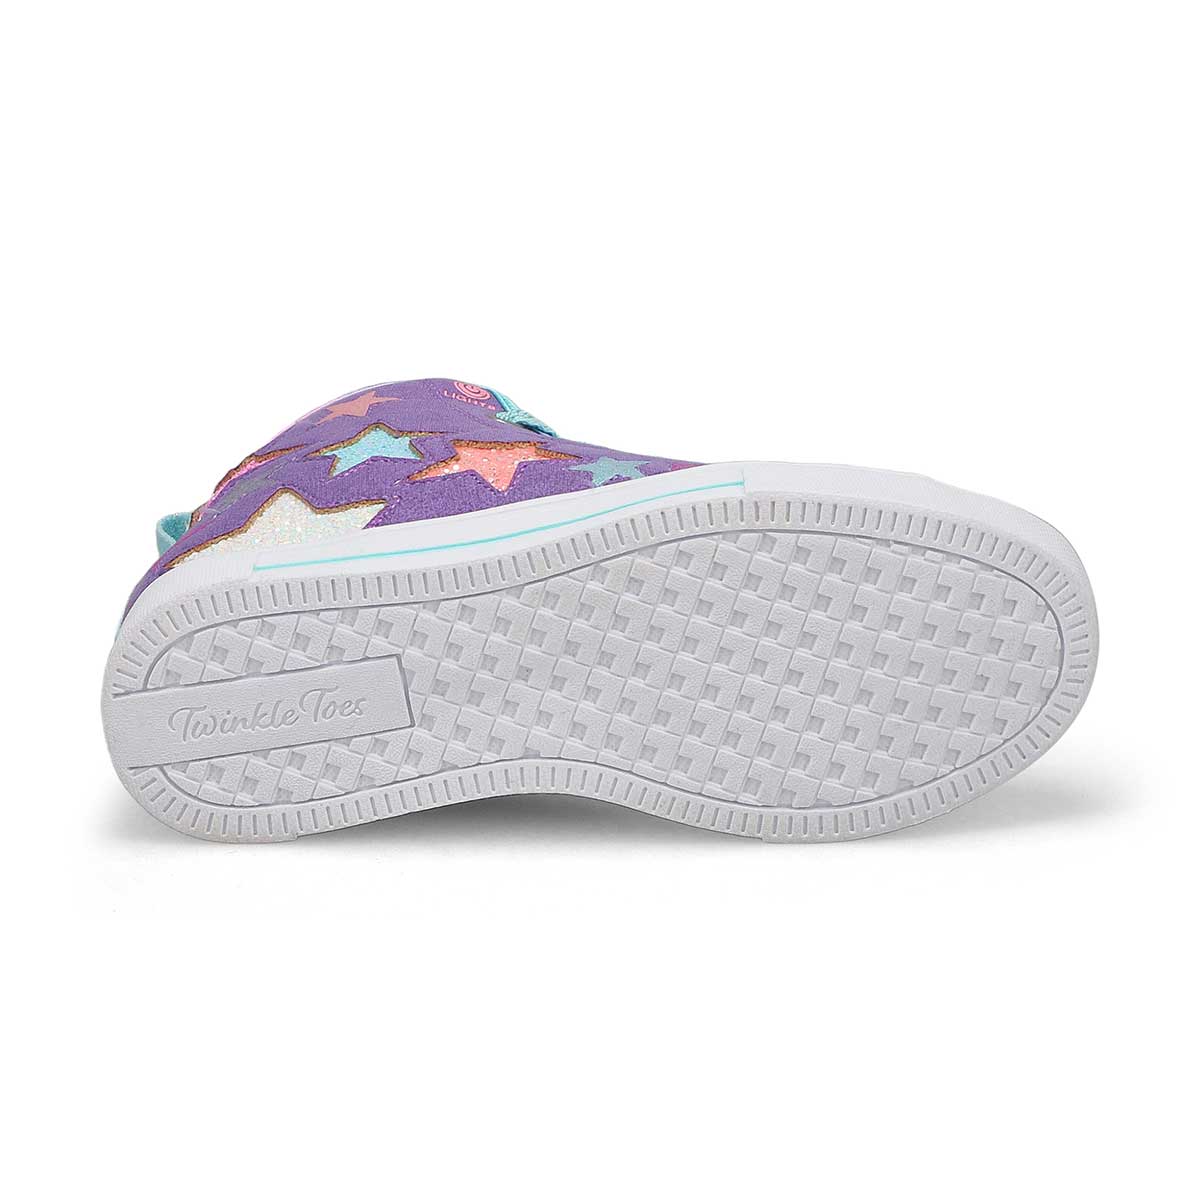 Skechers Twinkle Sparks - Shooting Star Girls' Lifestyle Shoes